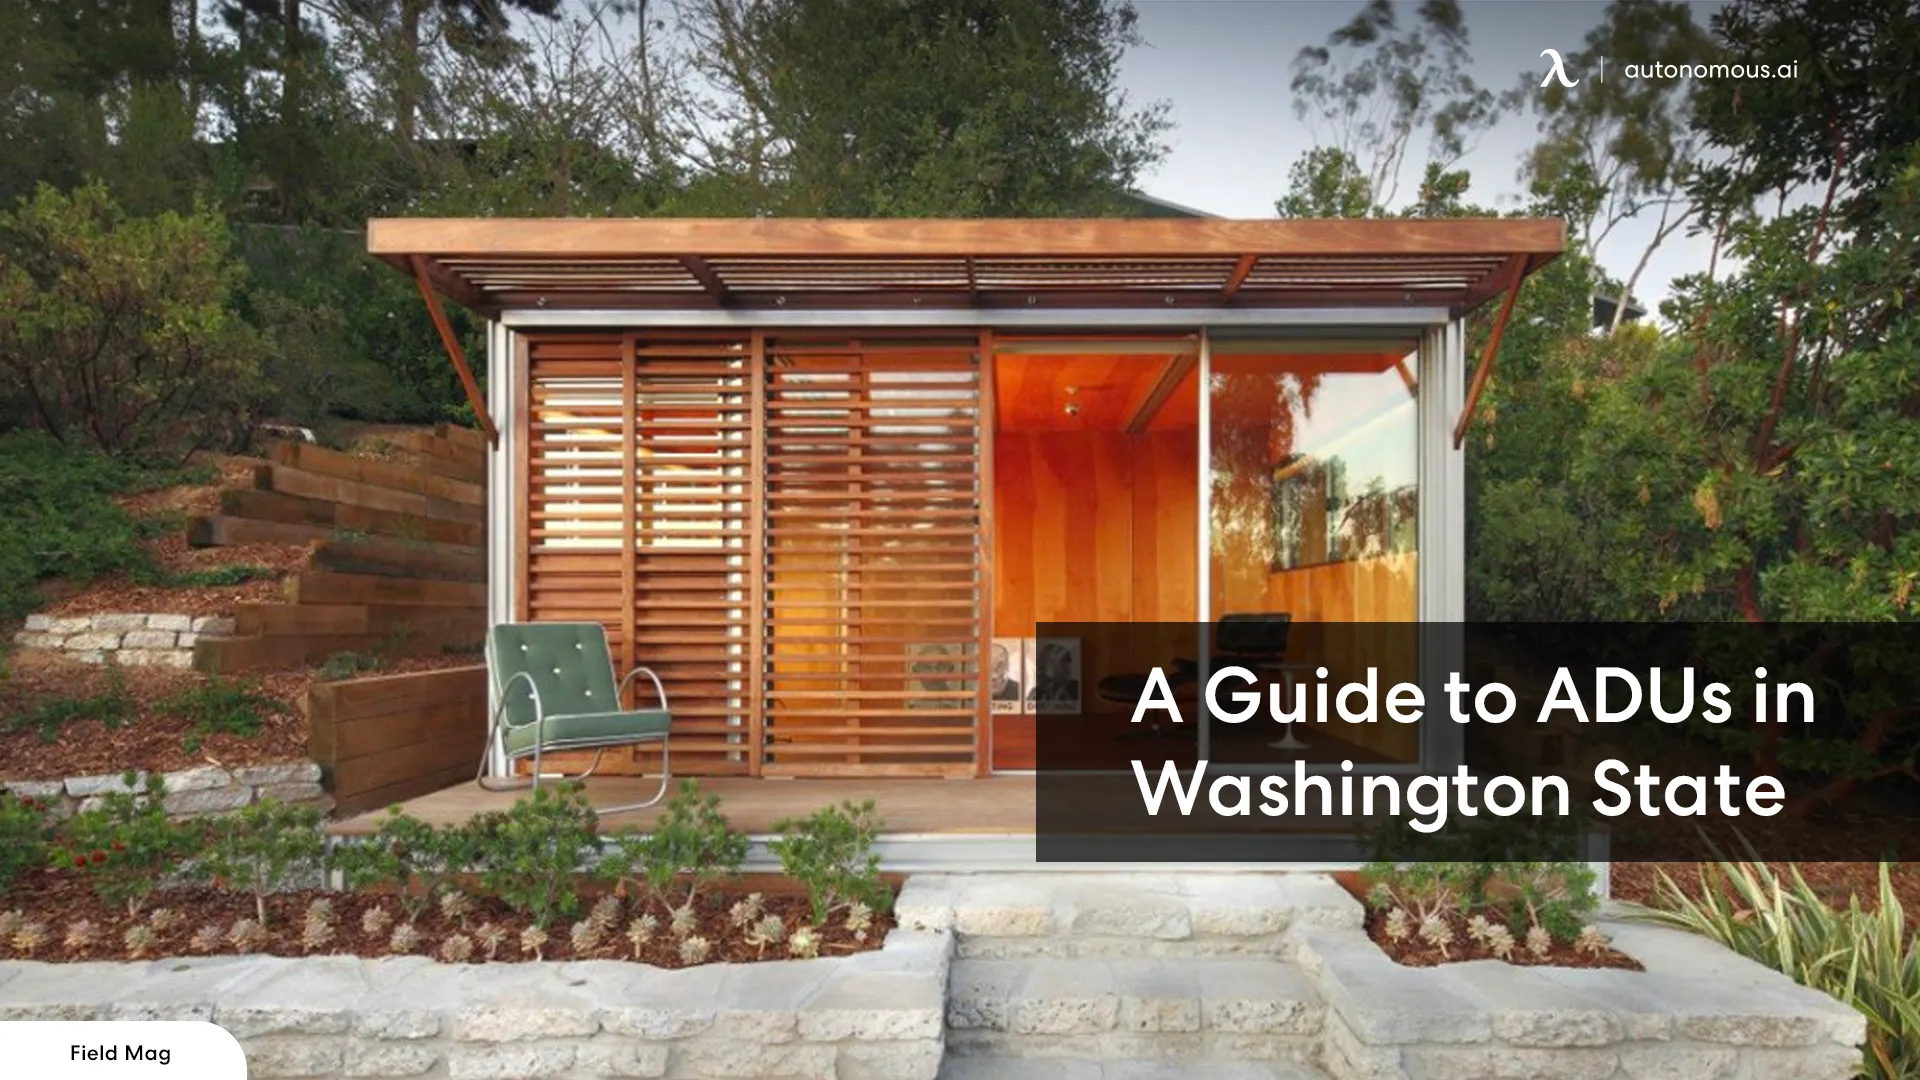 ADUs in Washington State: A Guide to Building and Living in ADU